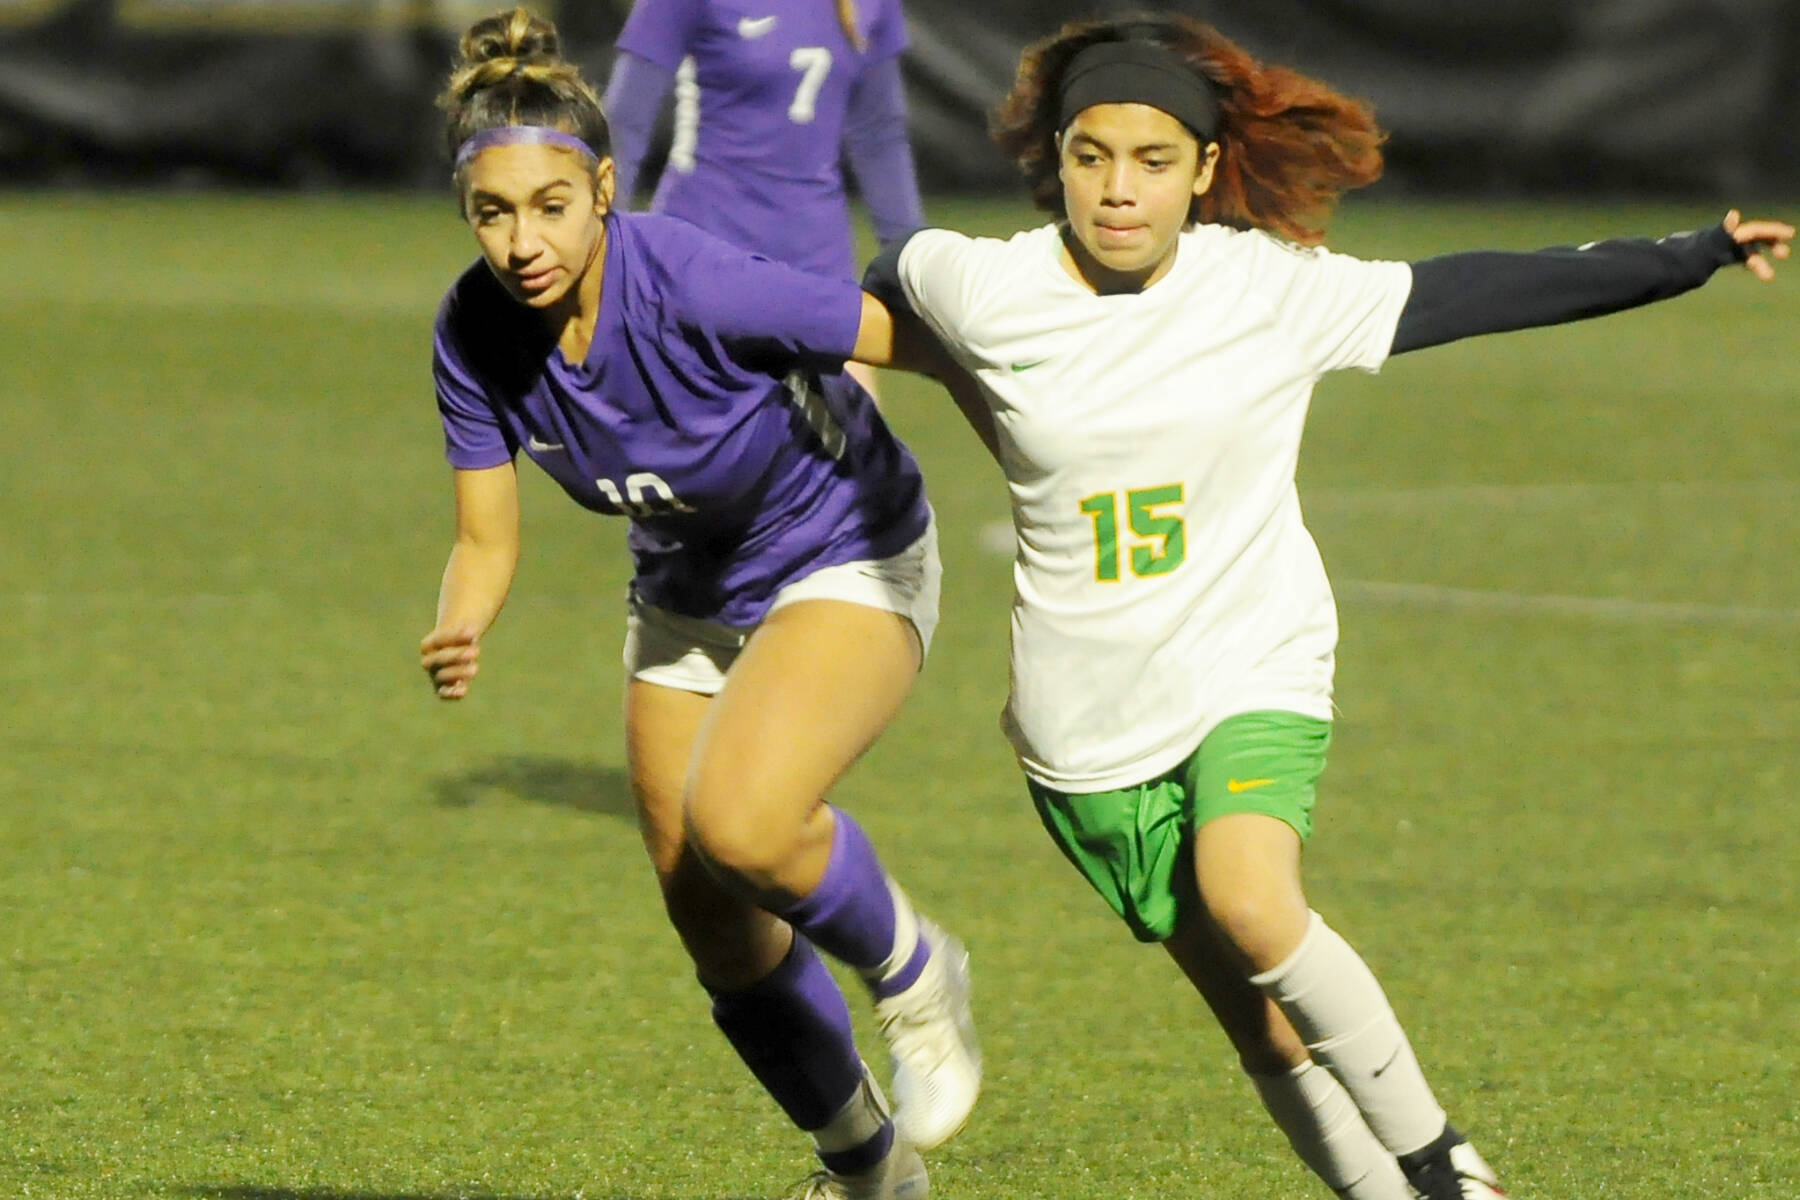 Sequim’s Jennyfer Gomez, left, battles with a Clover Park midfielder in the Wolves’ 2-0 win in the West Central District tourney opener Tuesday at Wally Sigmar Field at Peninsula College. In the background is Sequim’s Eve Breithaupt (7). (Michael Dashiell/Olympic Peninsula News Group)